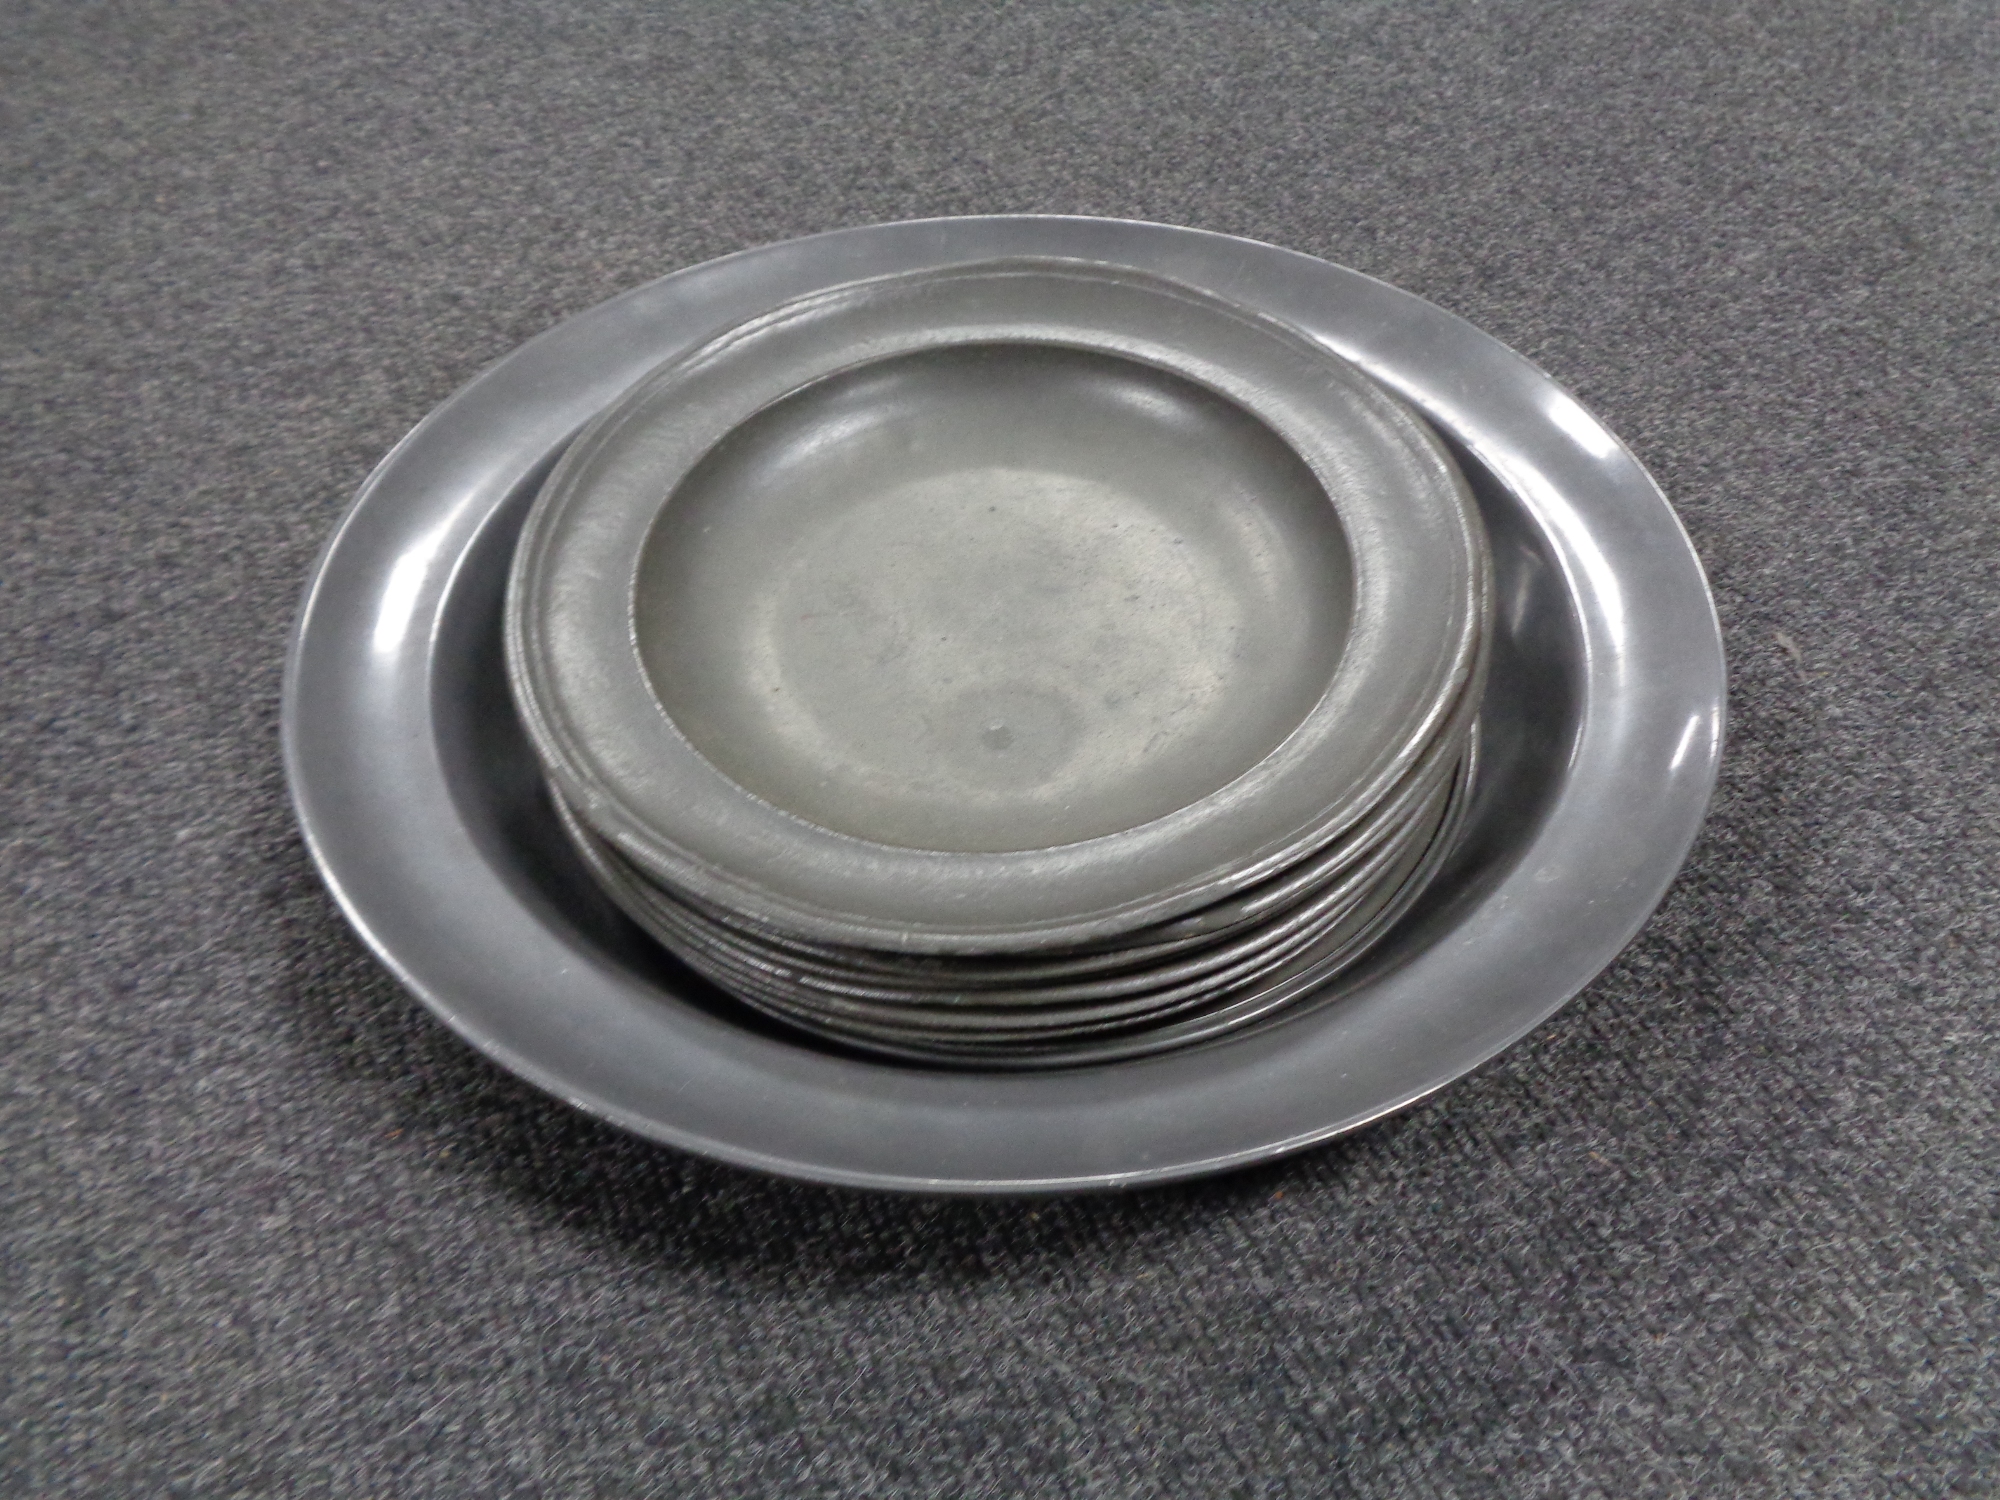 Ten antique pewter dishes and bowls